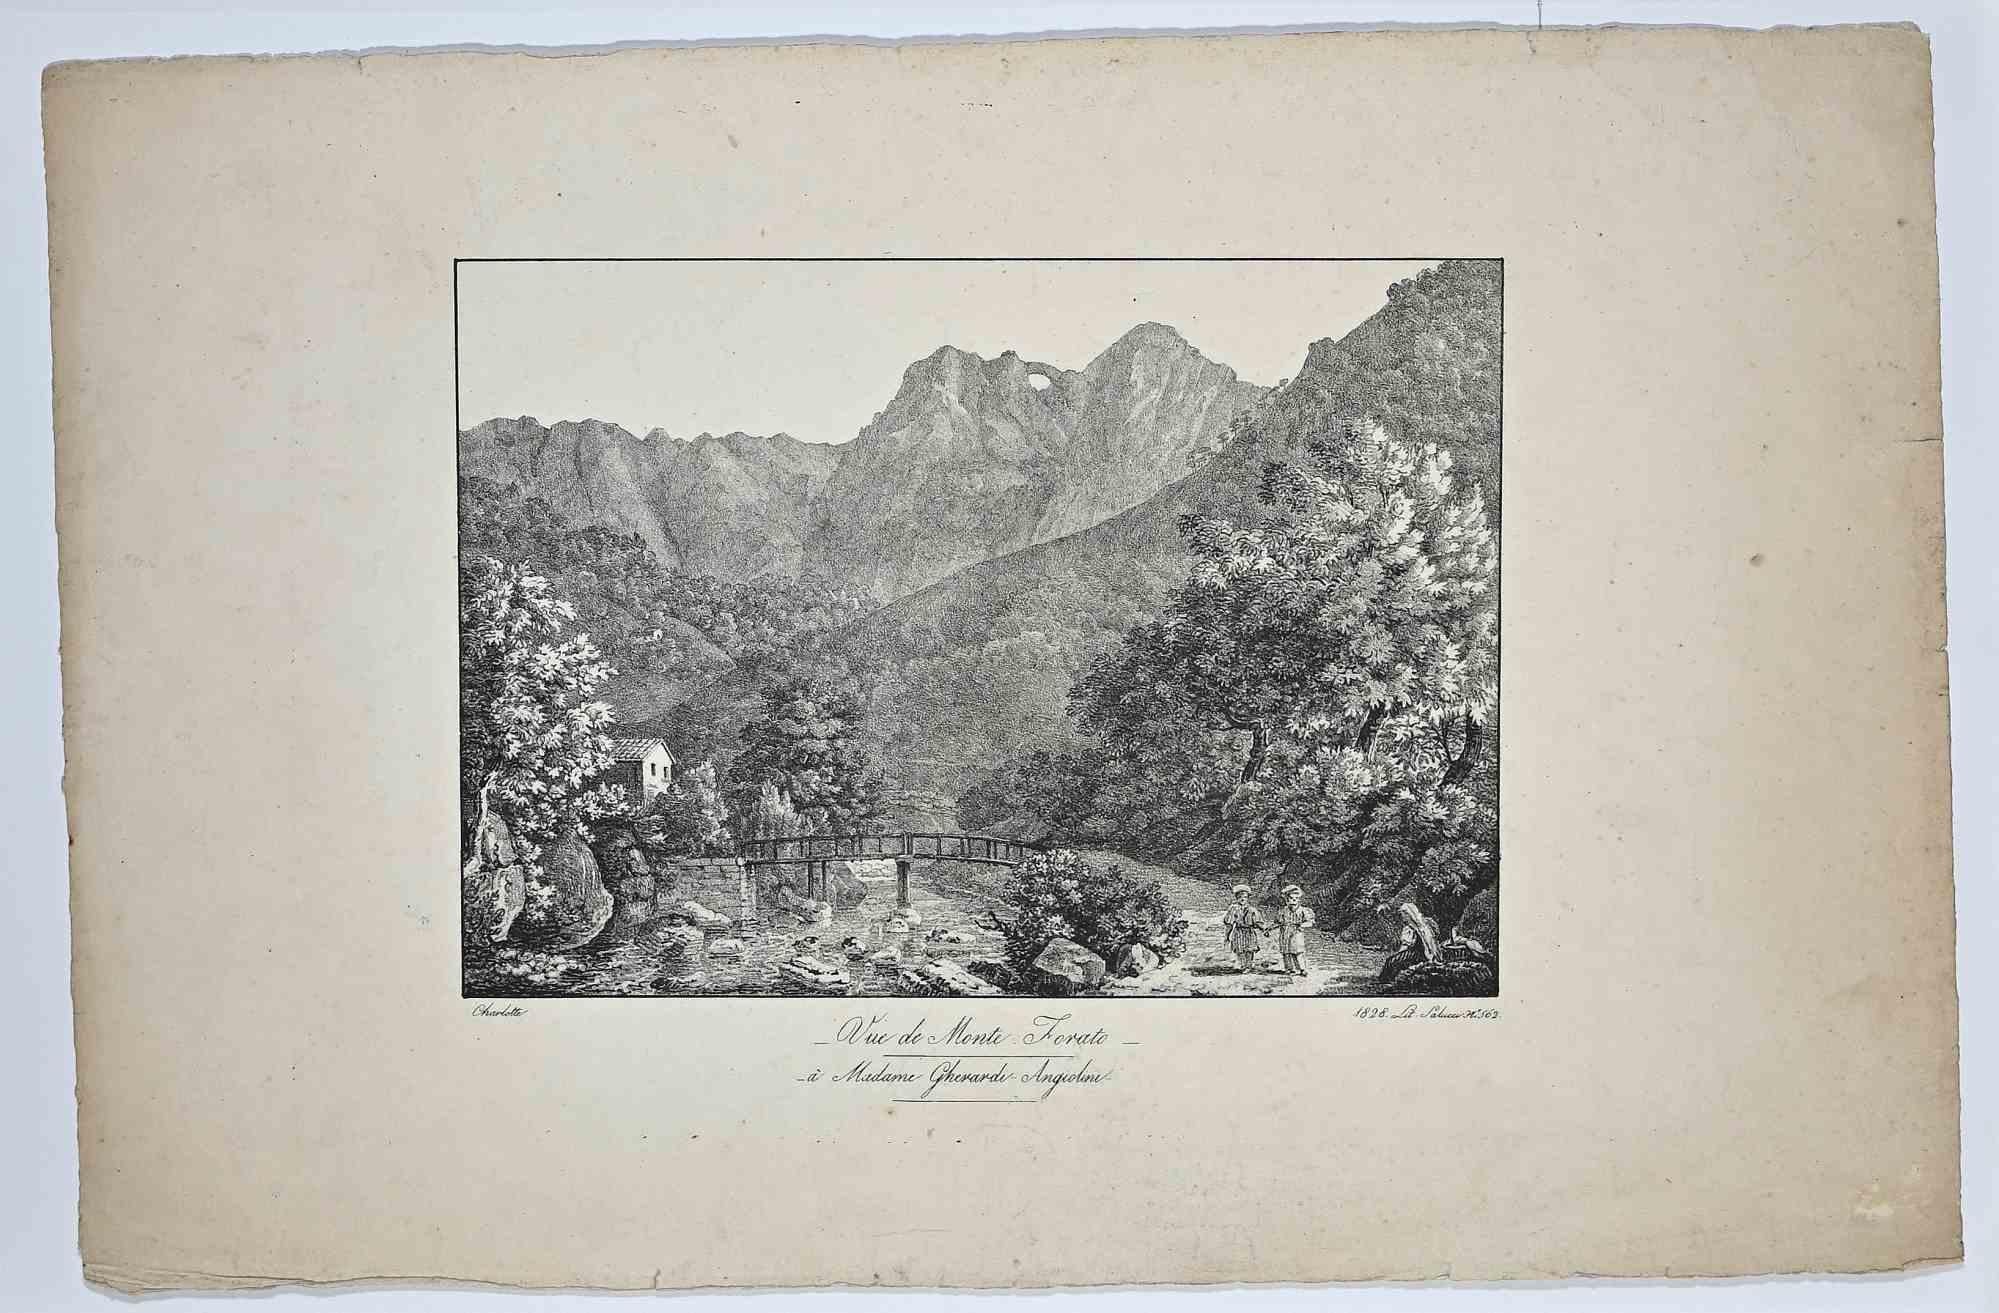 Landscape is an original Lithograph by Charlotte Bonaparte in the 19th Century.

Good conditions.

The artwork is depicted through soft strokes in a well-balanced composition.